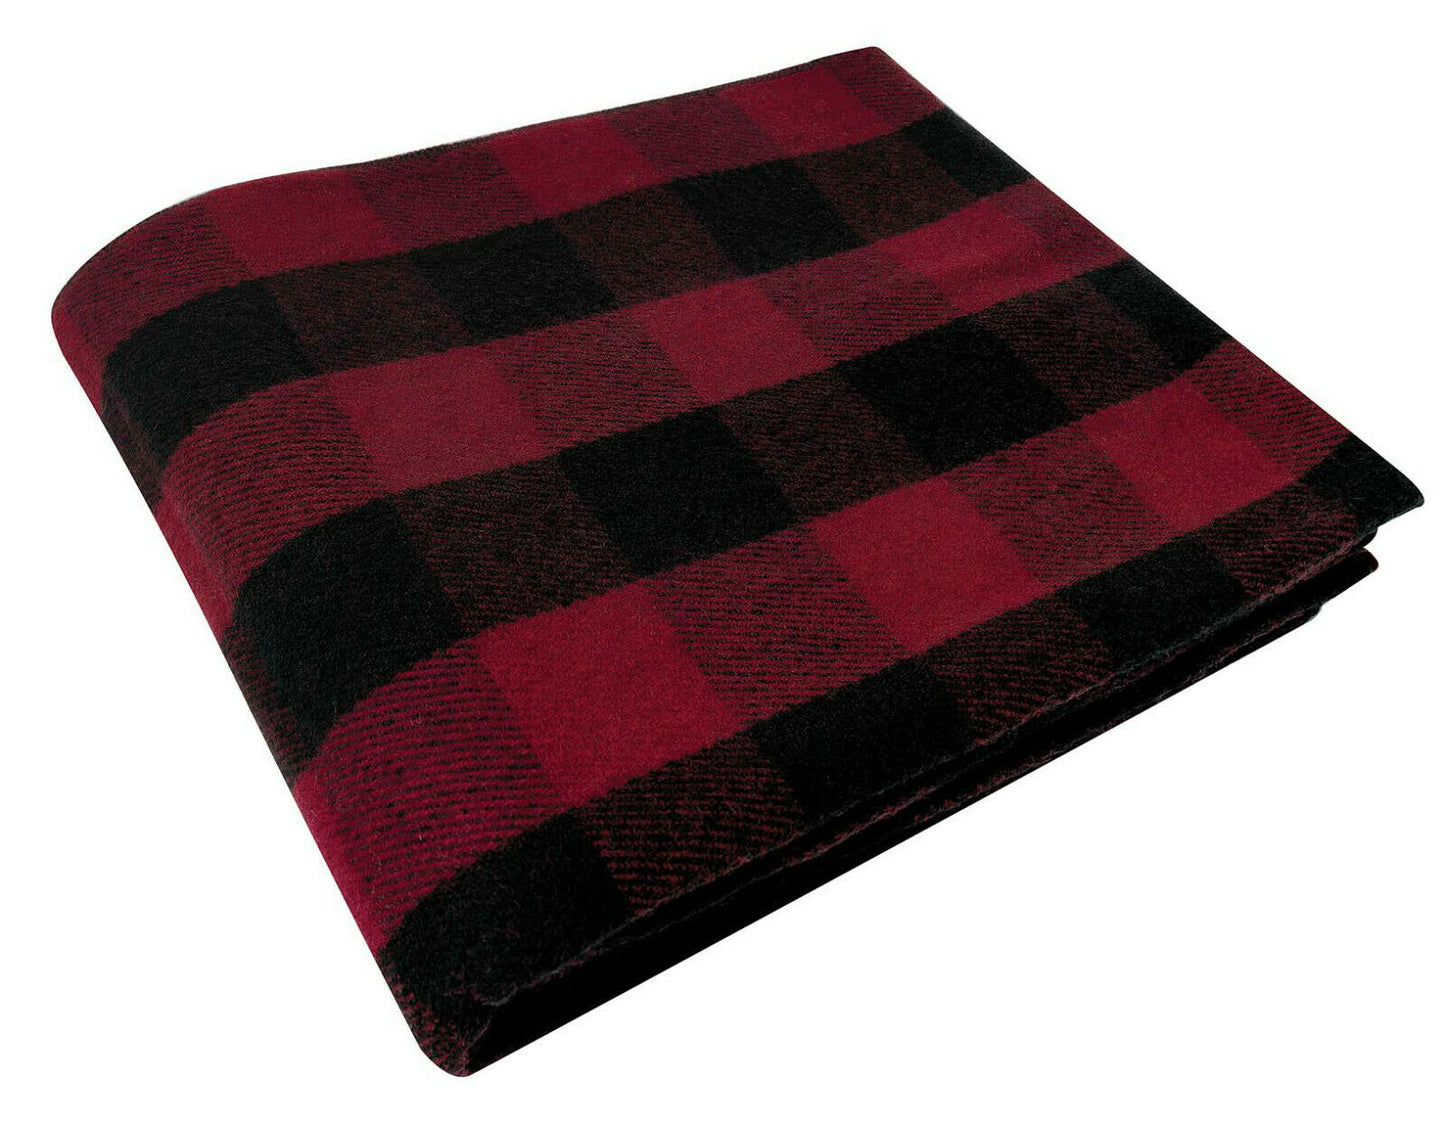 Red Plaid Wool Blanket Camping Survival Hiking Warm Blanket Rothco 1146